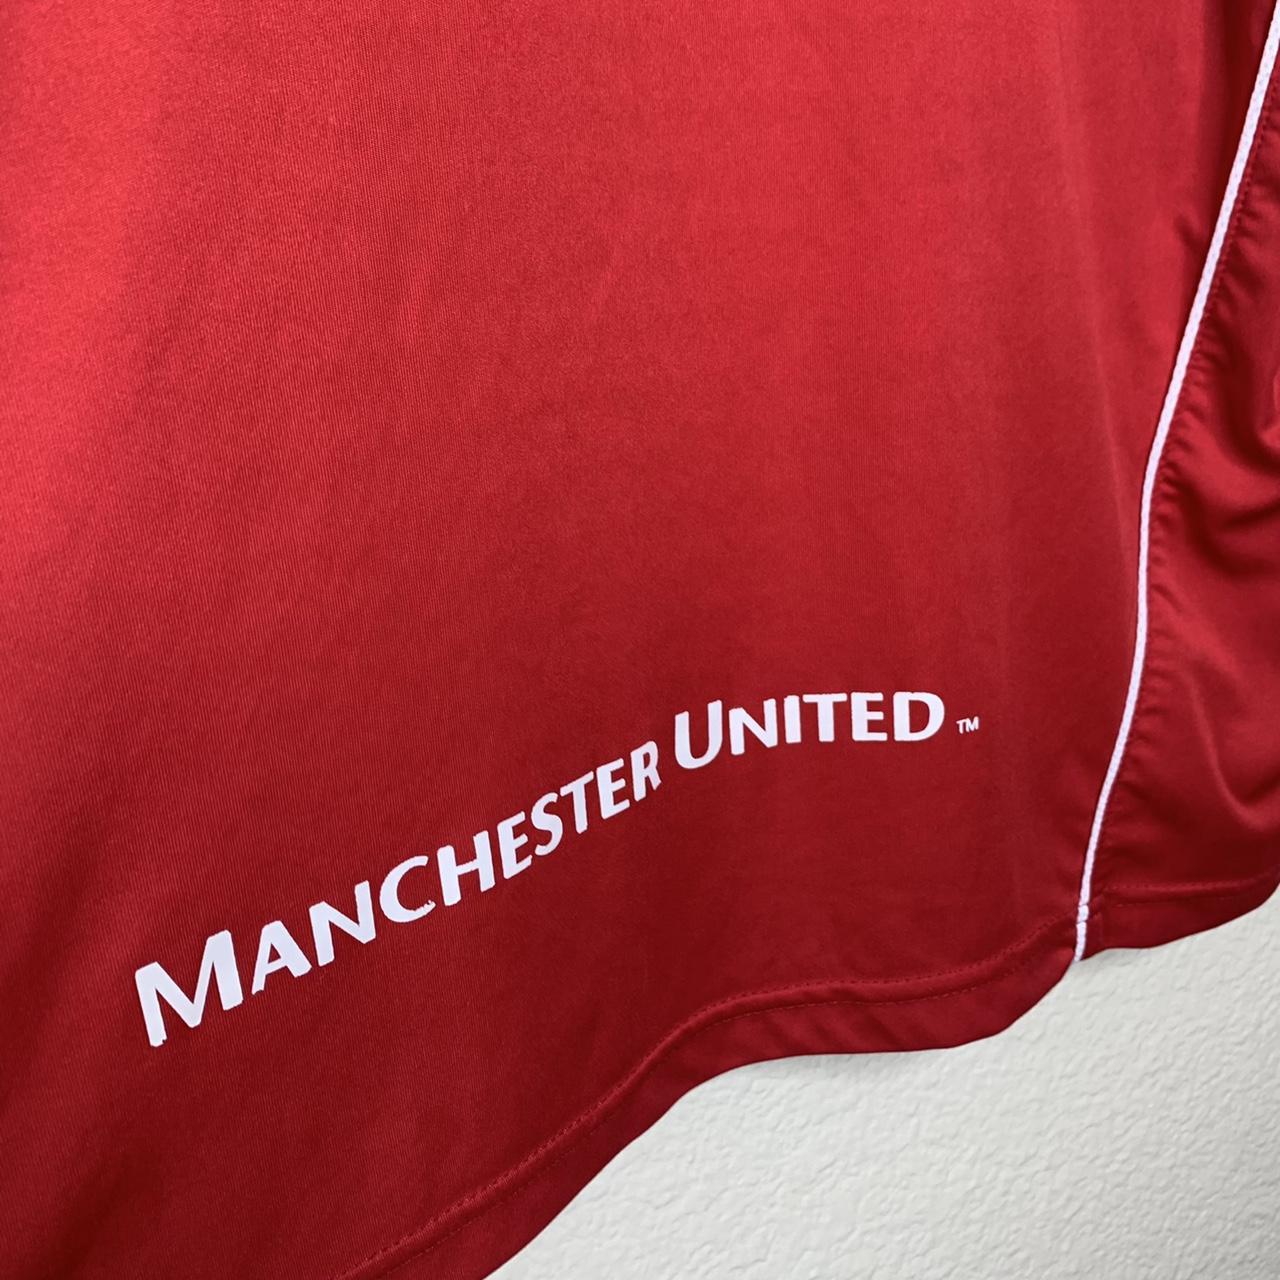 Product Image 4 - Manchester United training jersey .
•
#manchester